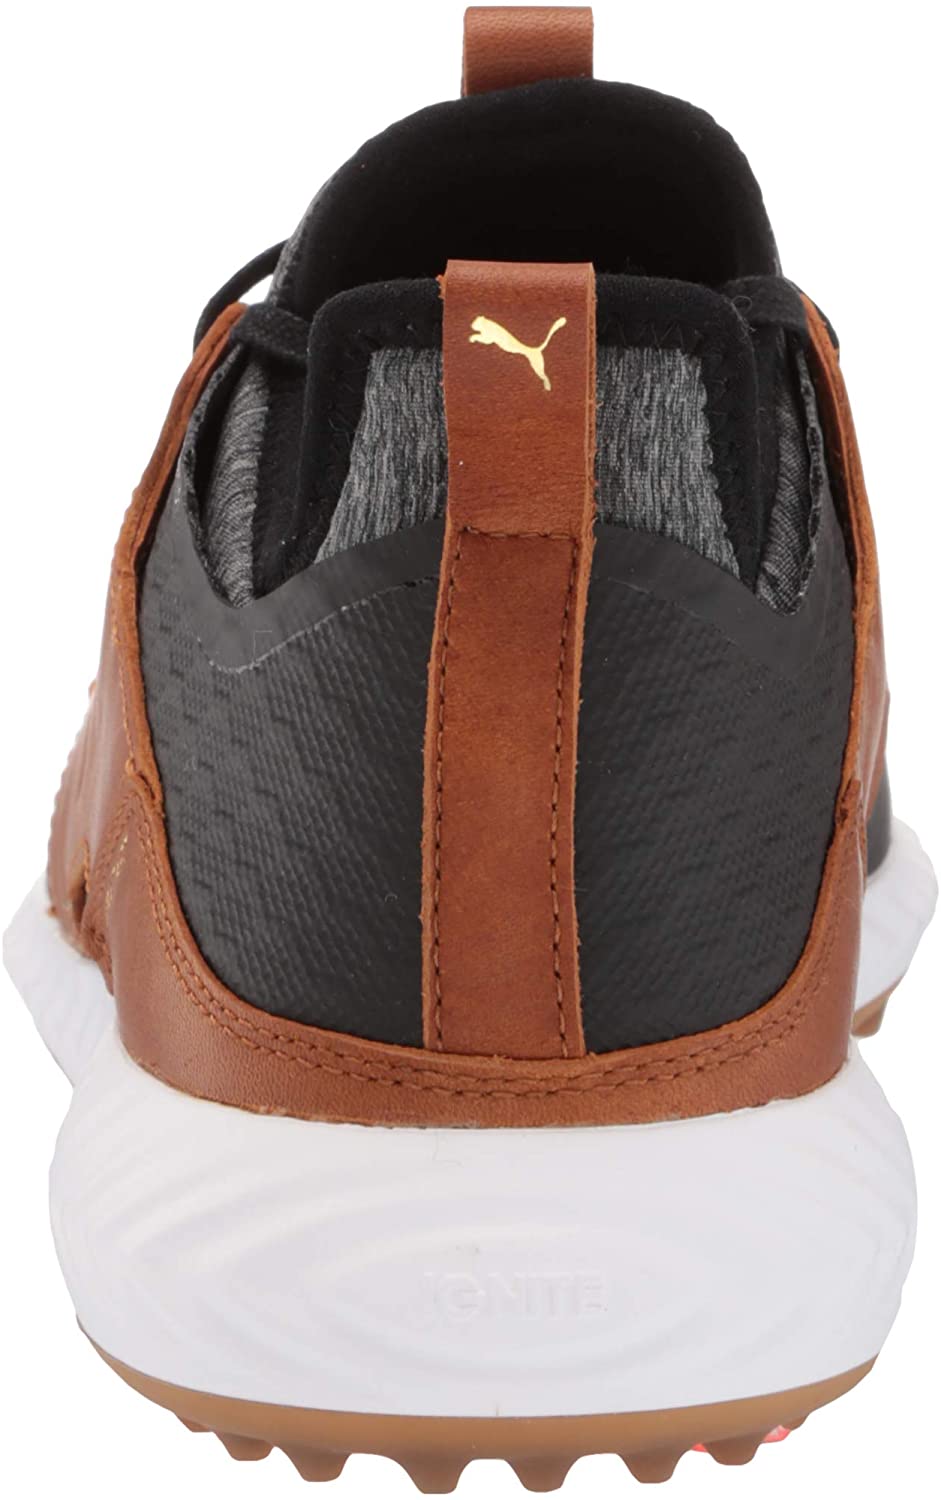 NEW Mens Puma Ignite PWRADAPT Caged Crafted Golf Shoes Black / Brown / Gold 9.5 M - image 3 of 8